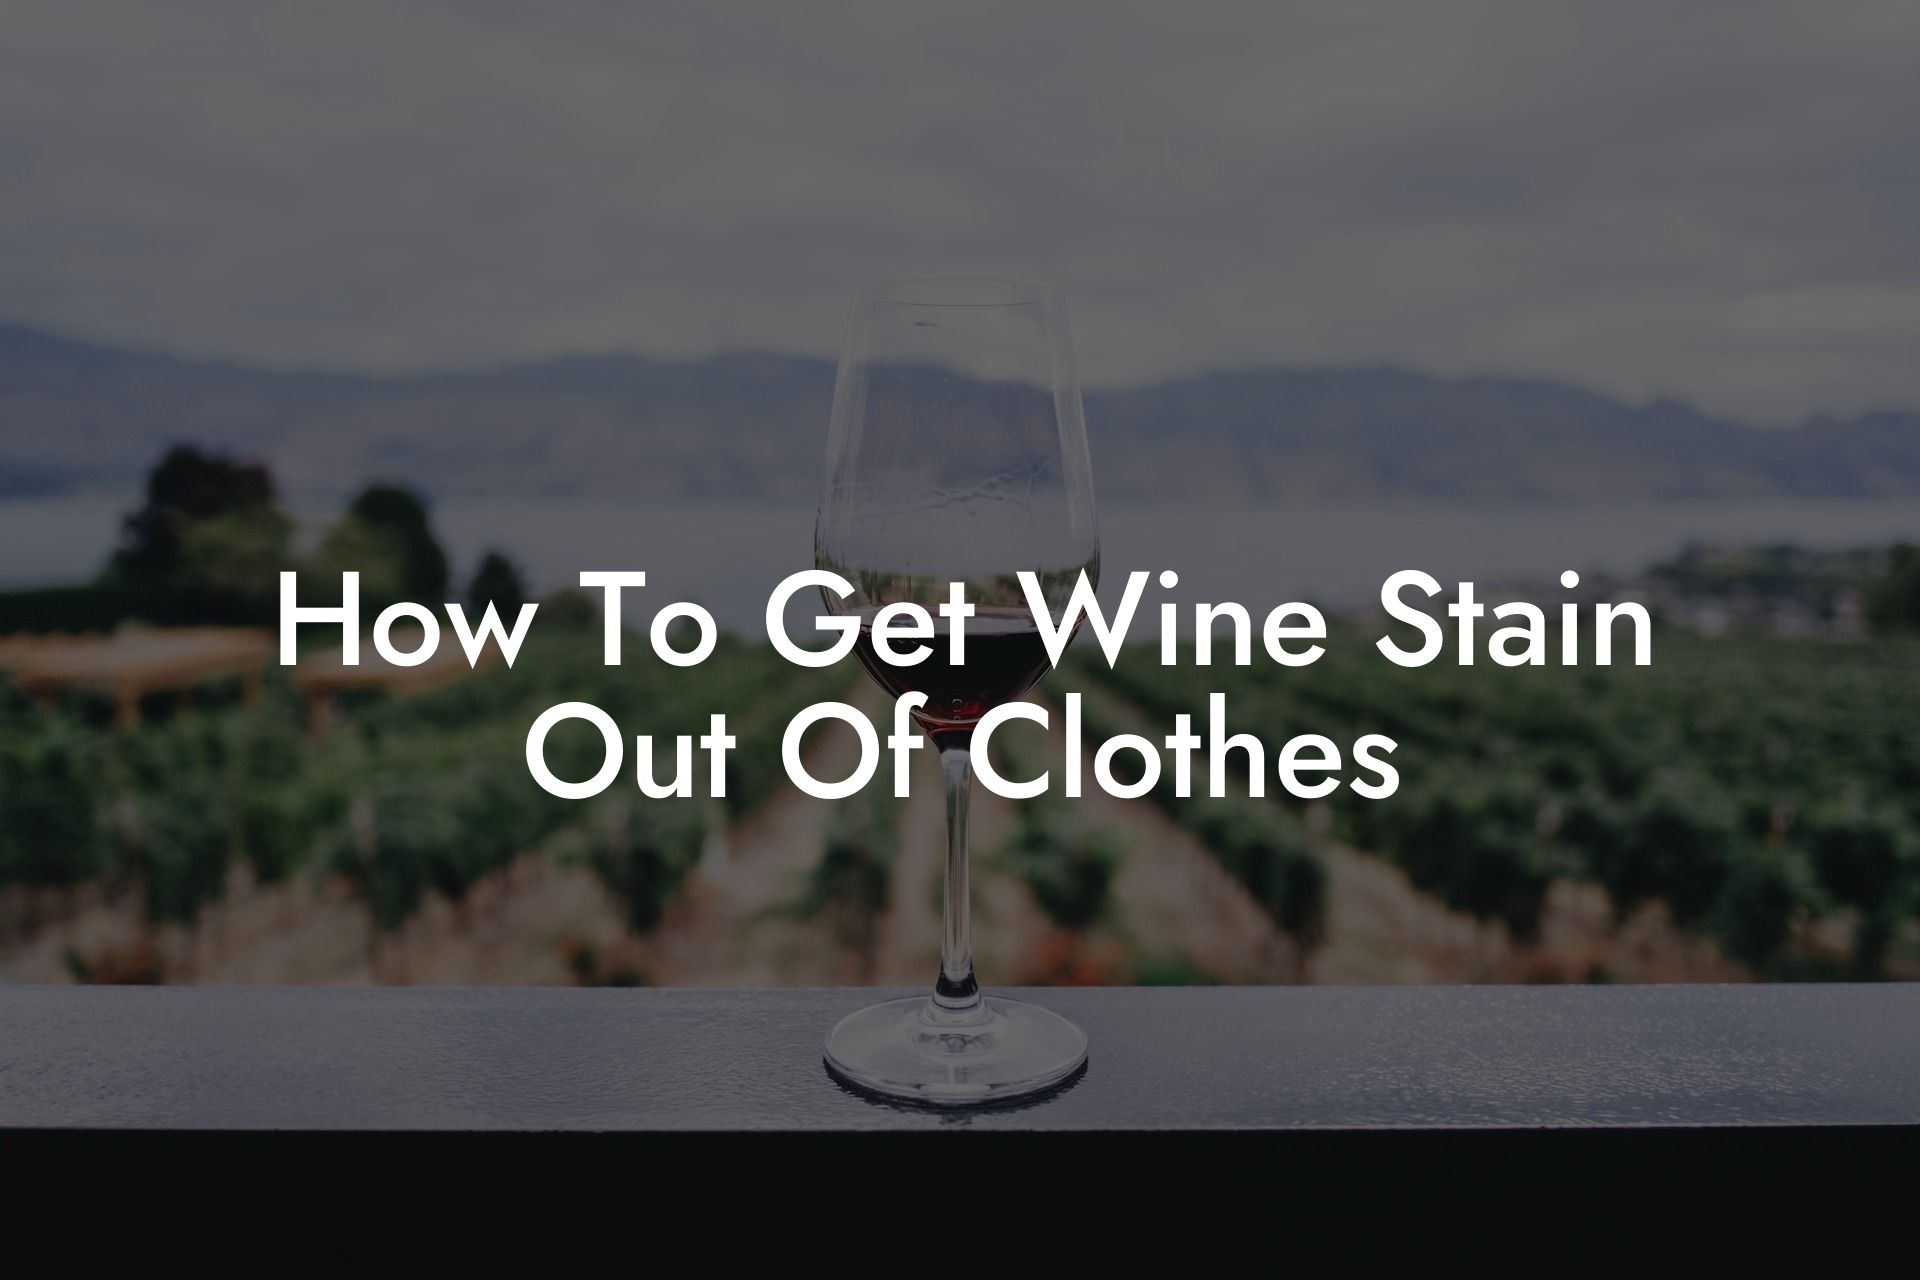 How To Get Wine Stain Out Of Clothes